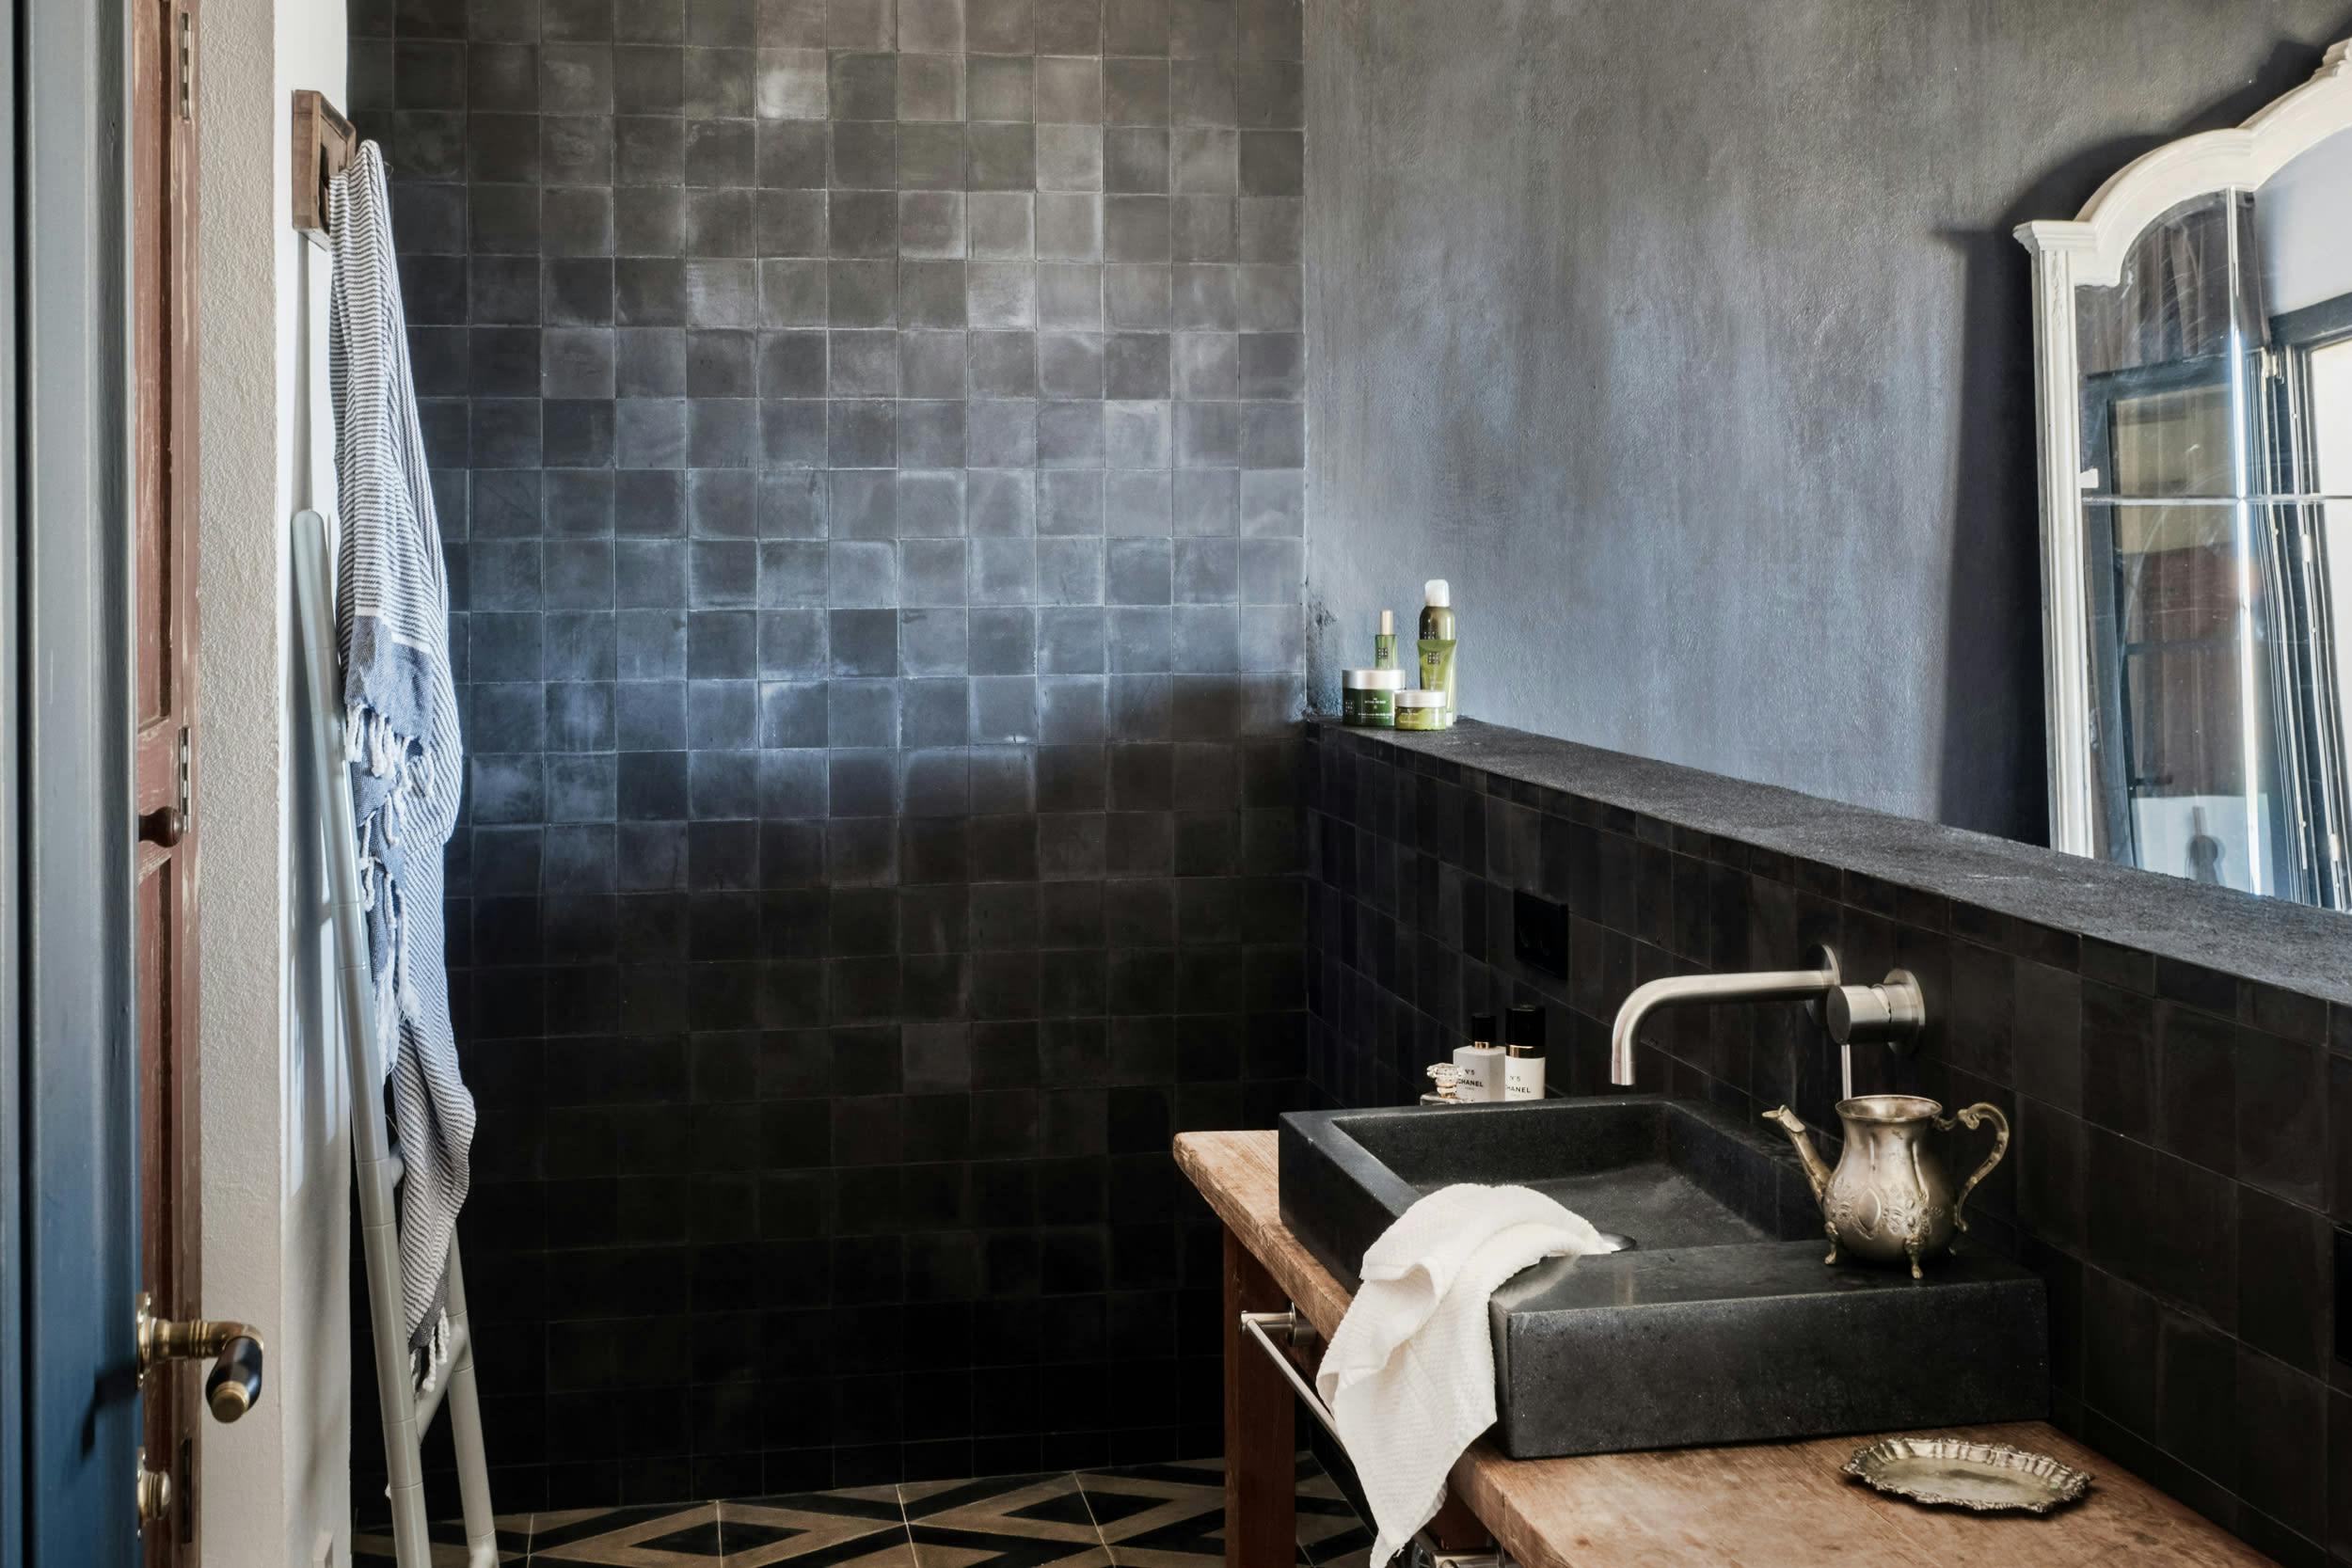 The image features a black and gray bathroom with a sink, a mirror, and a window.